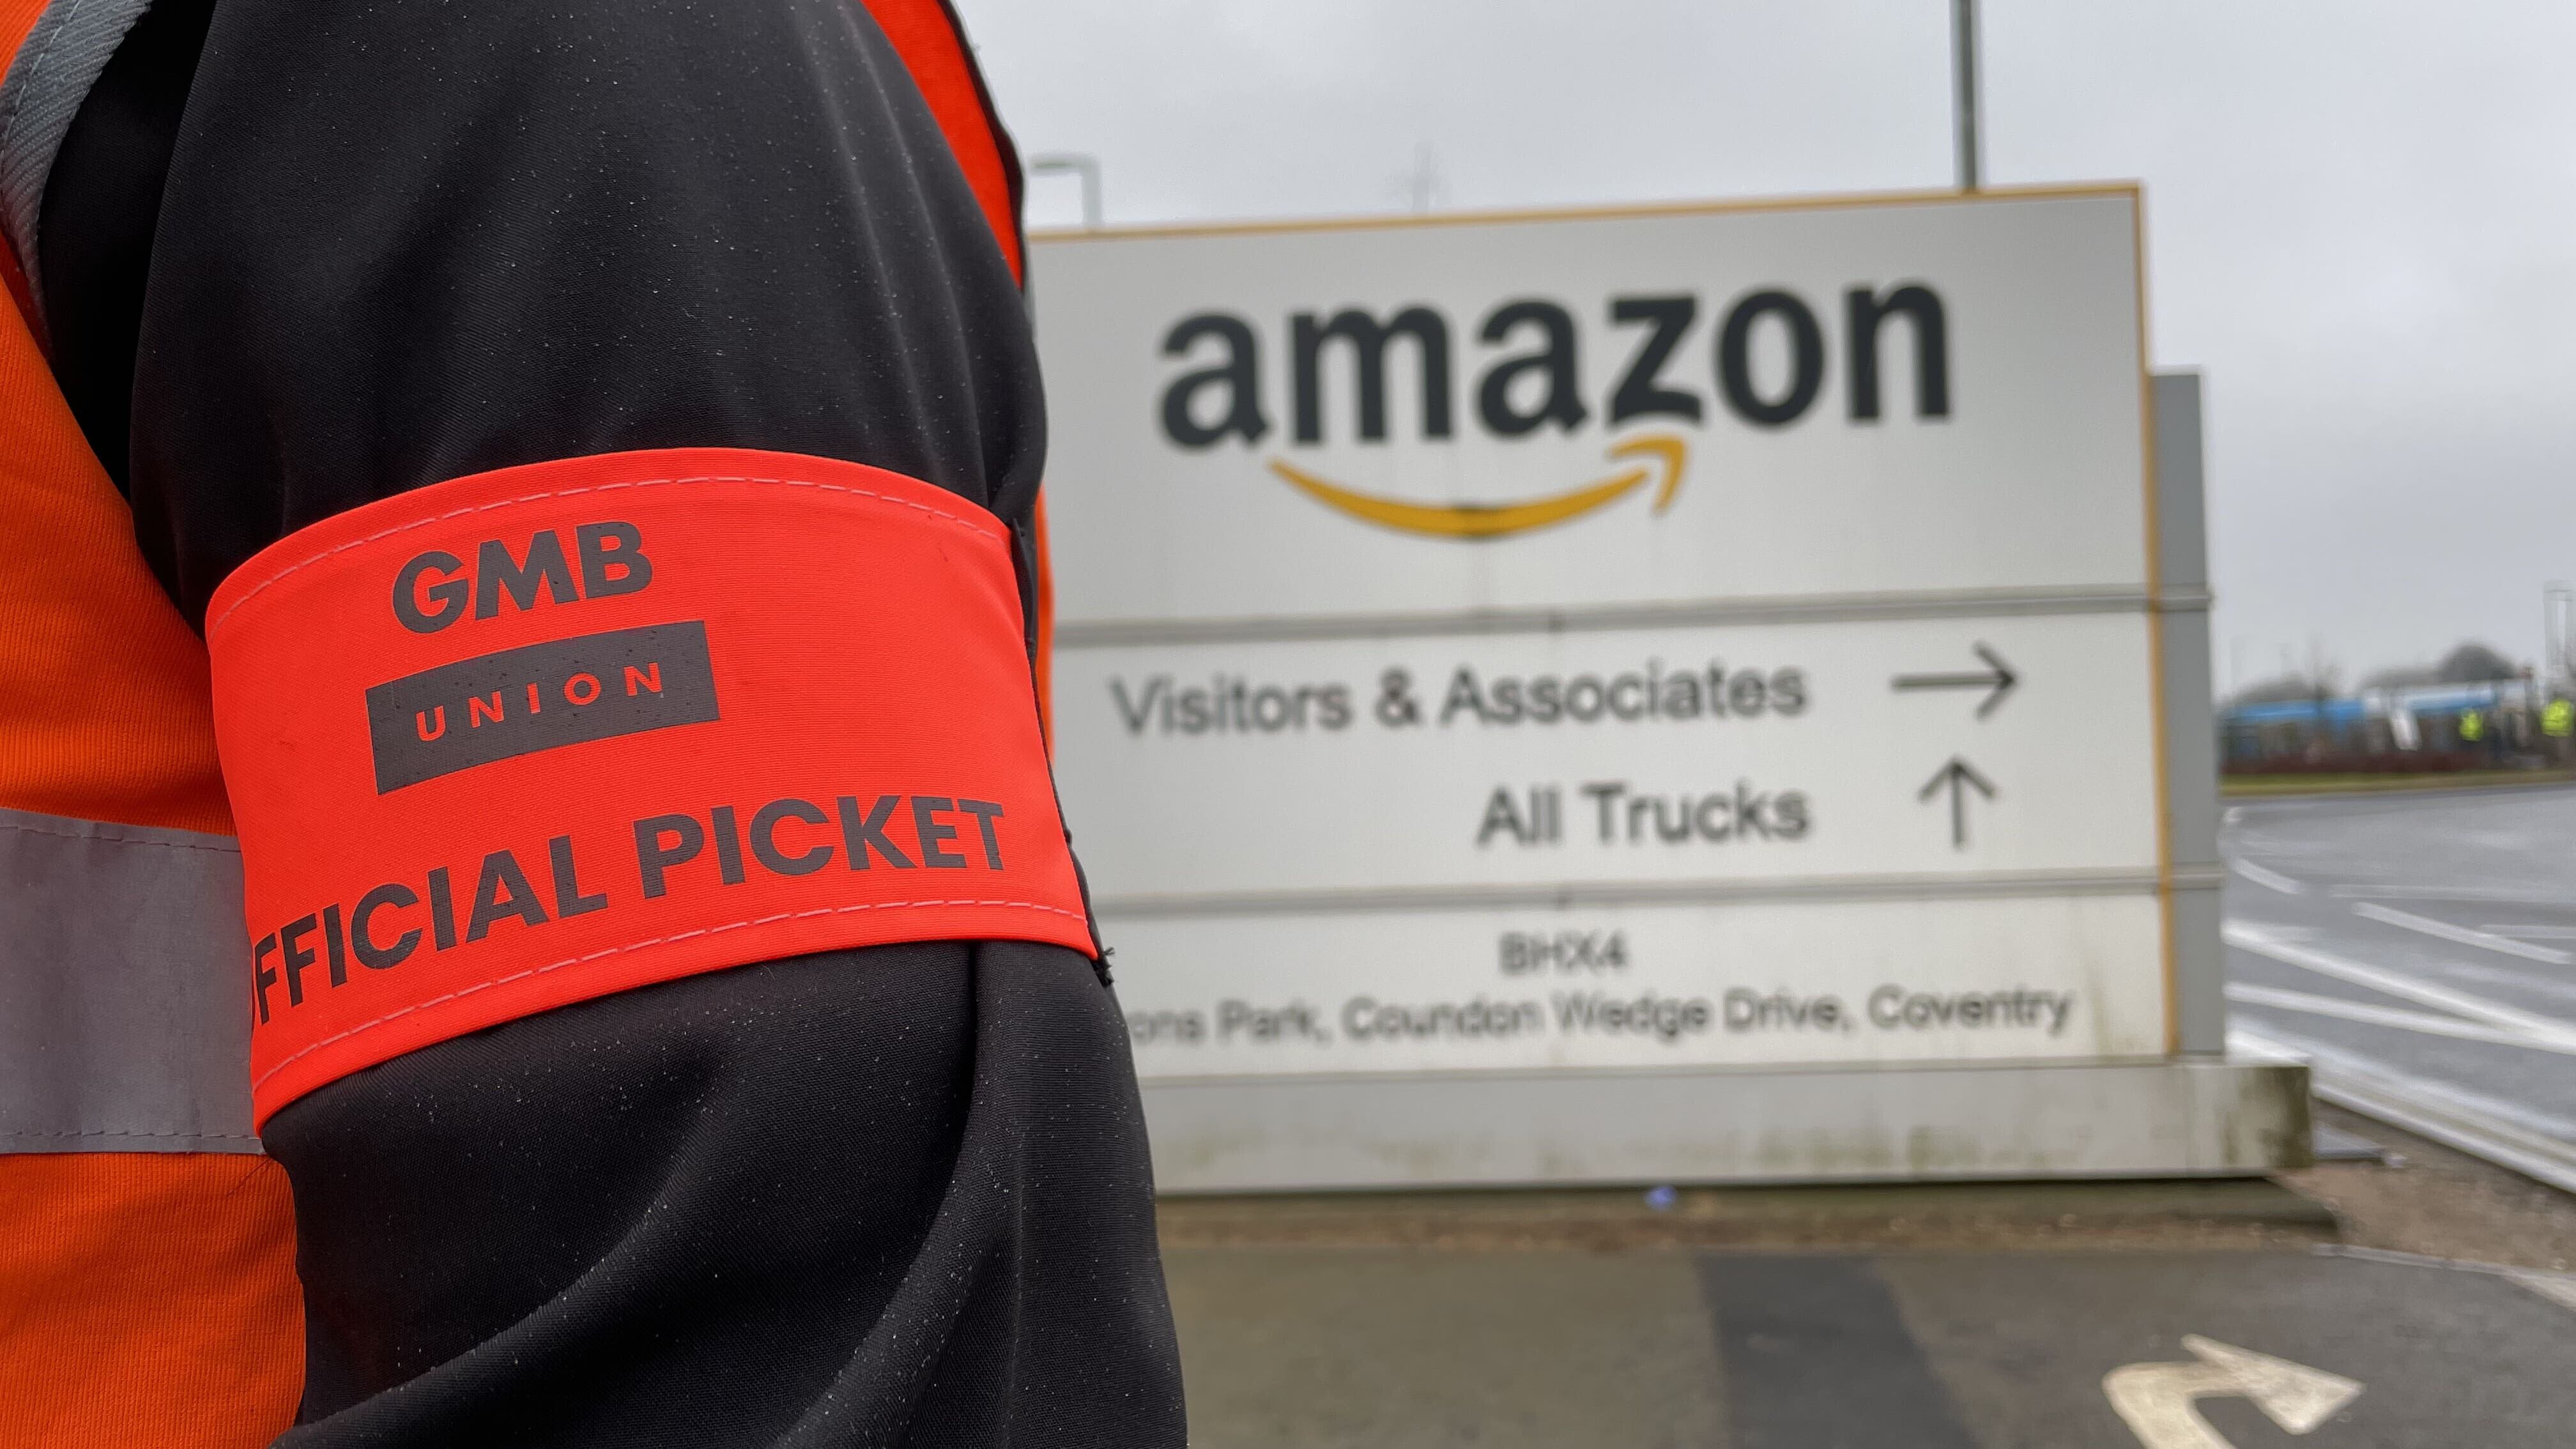 Members of the GMB union on the picket line outside the Amazon fulfilment centre in Coventry earlier in the year (Phil Barnett/PA)